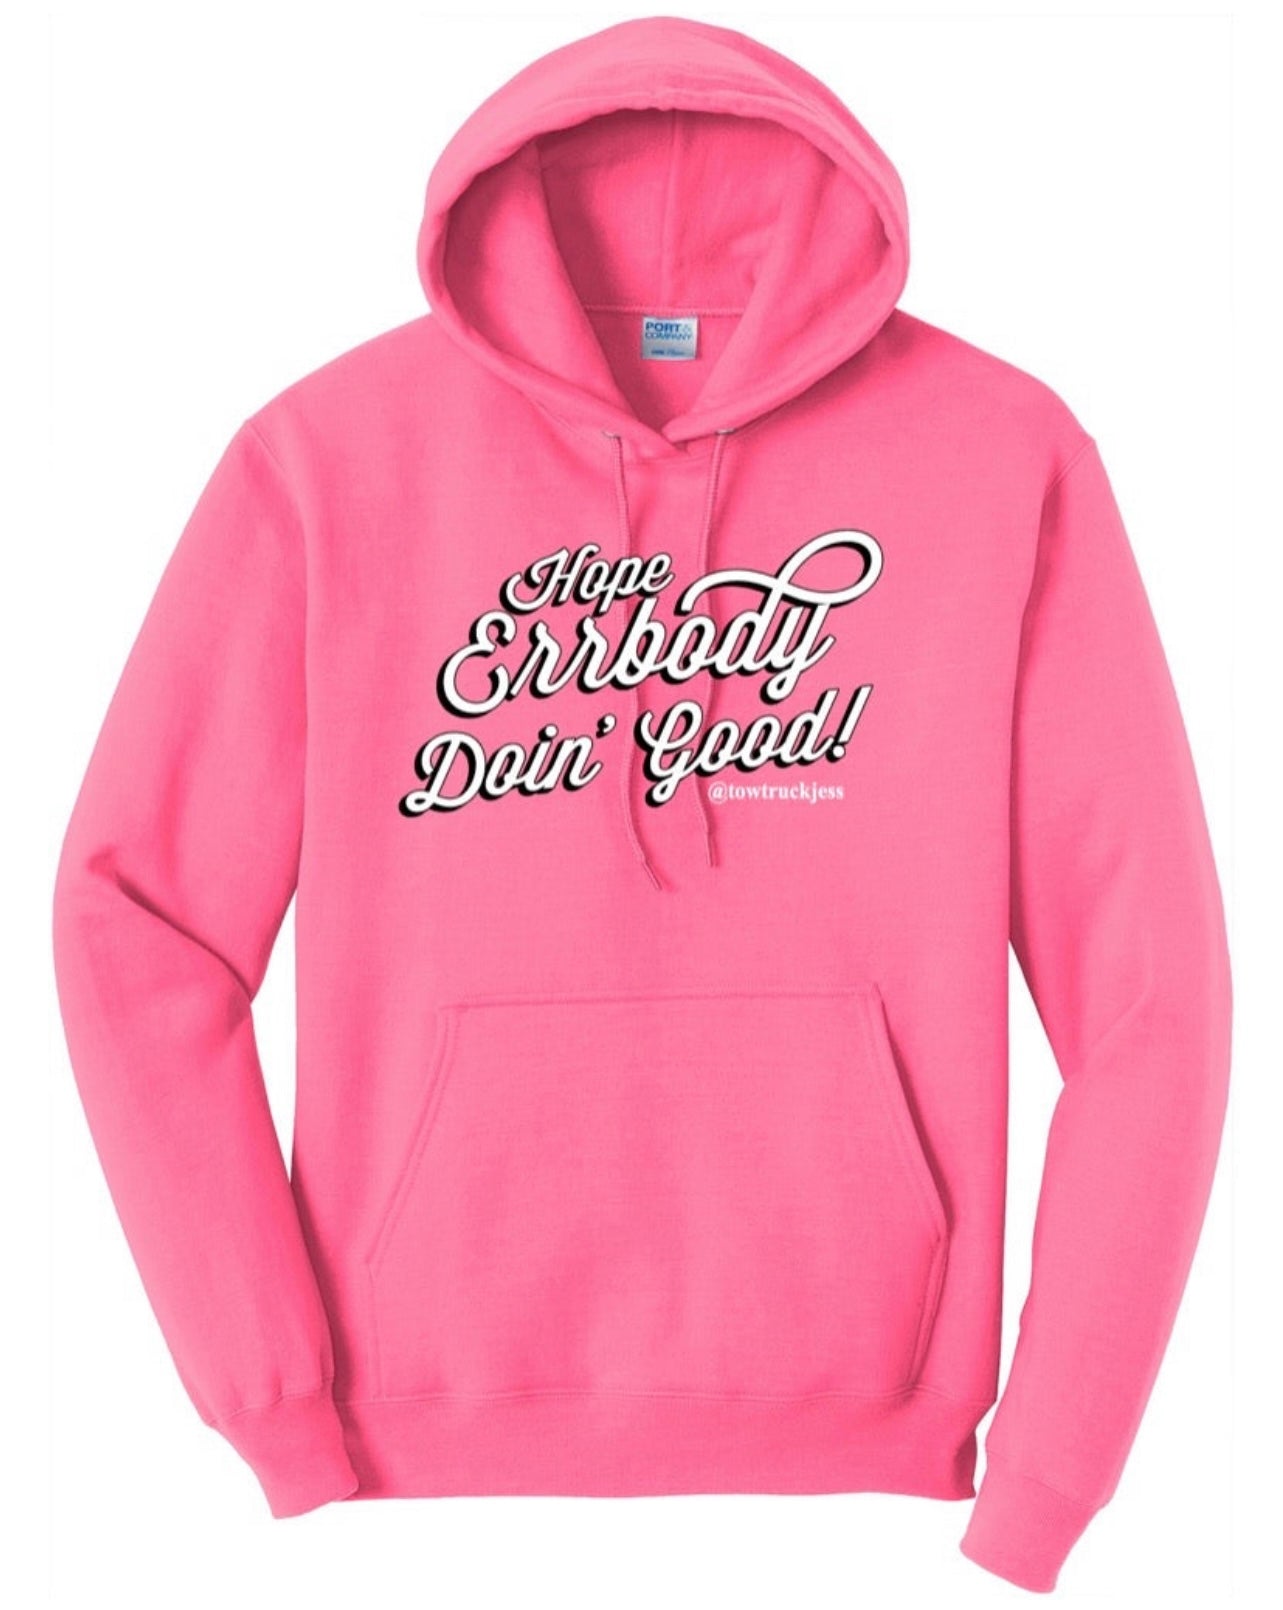 A BIG SAVE $10 OFF Pink 2-Tone Hope Errbody Doin’ Good Tow Truck Jess Hoodie *WHILE SUPPLIES LAST*